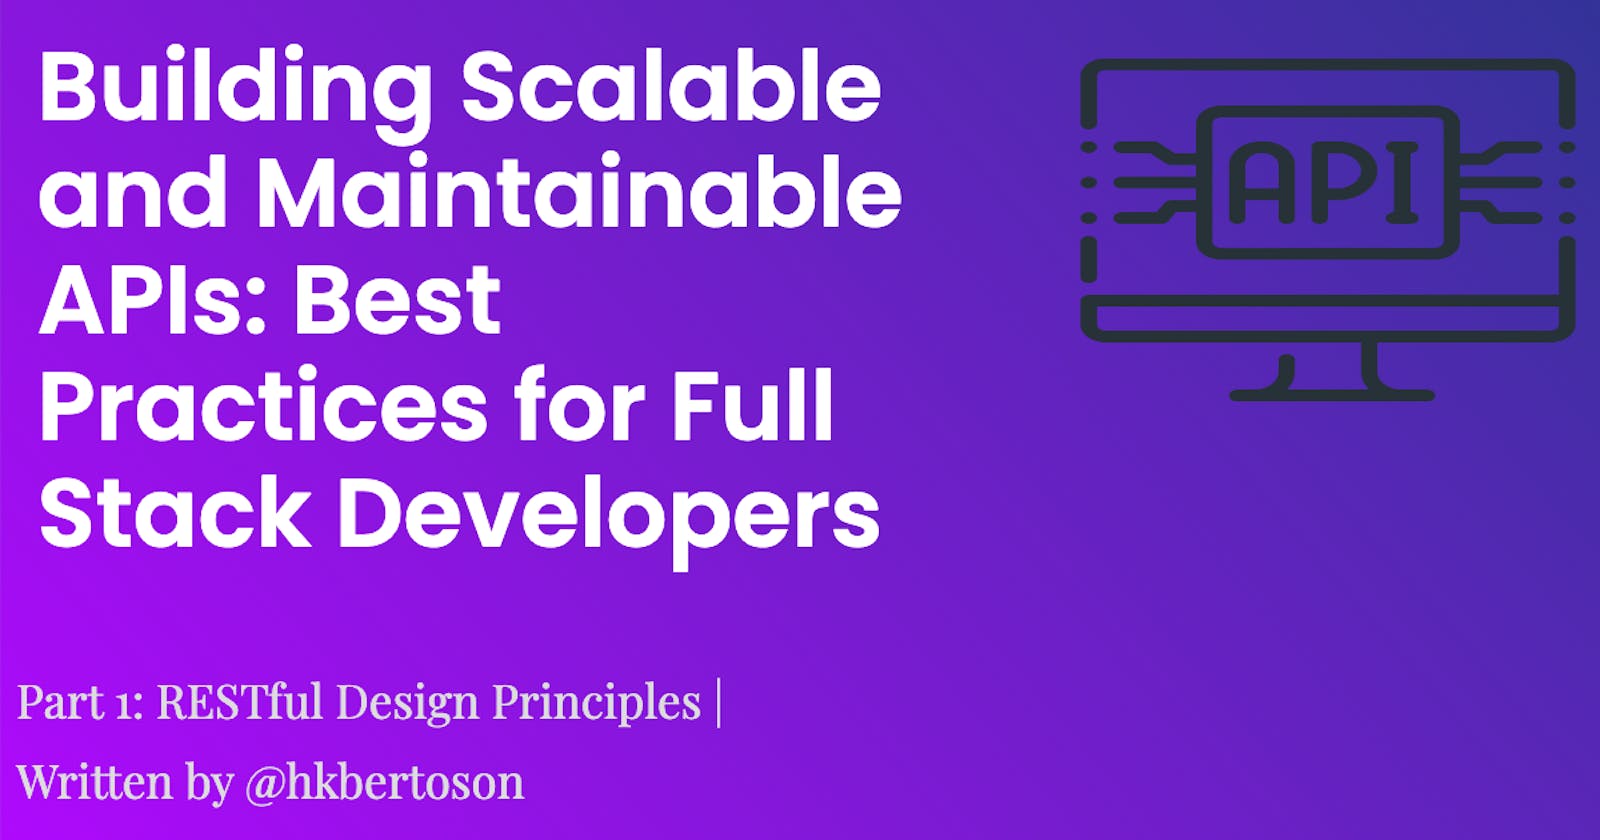 Building Scalable and Maintainable APIs: Best Practices for Full Stack Developers